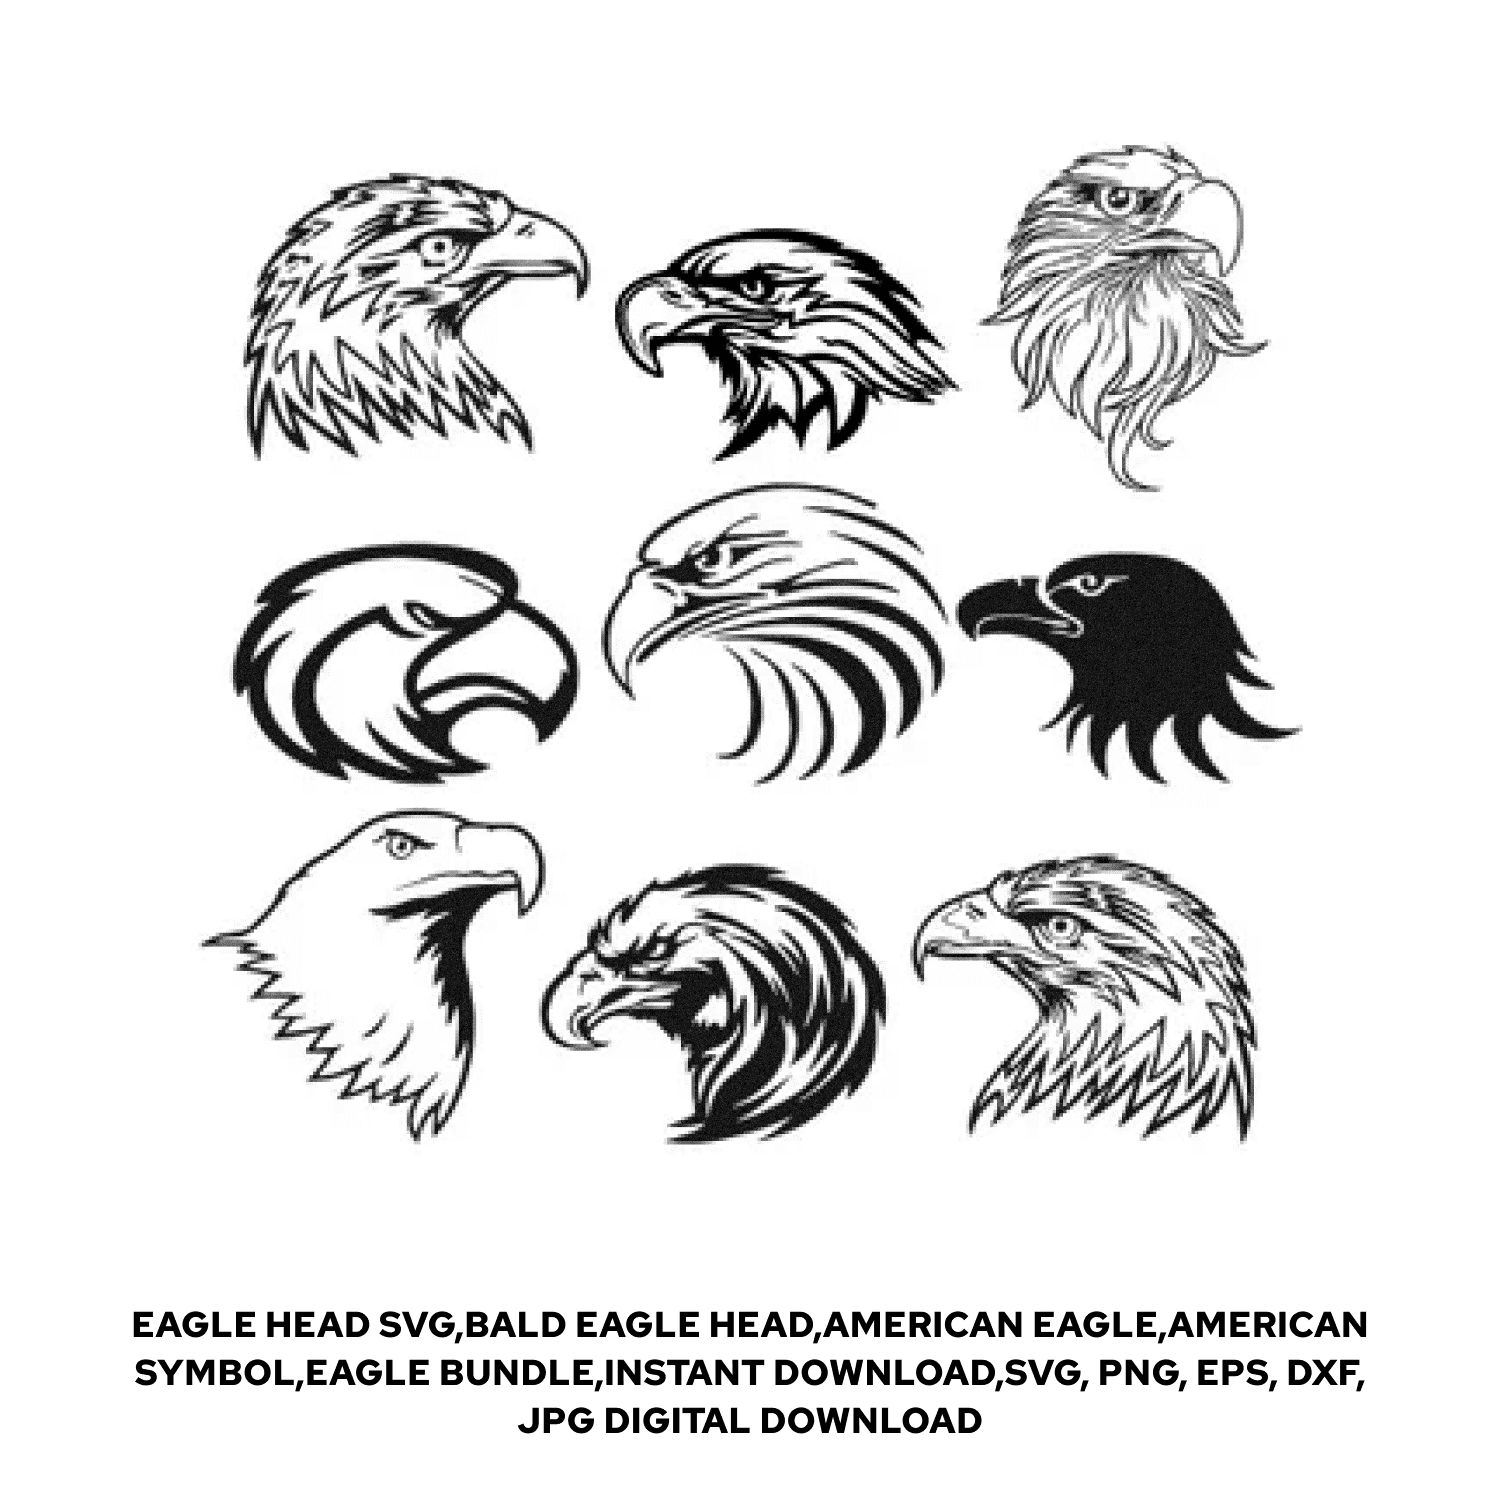 Eagle Heads Vector Silhouette Shapes Illustration Stock Vector (Royalty  Free) 2304749305 | Shutterstock